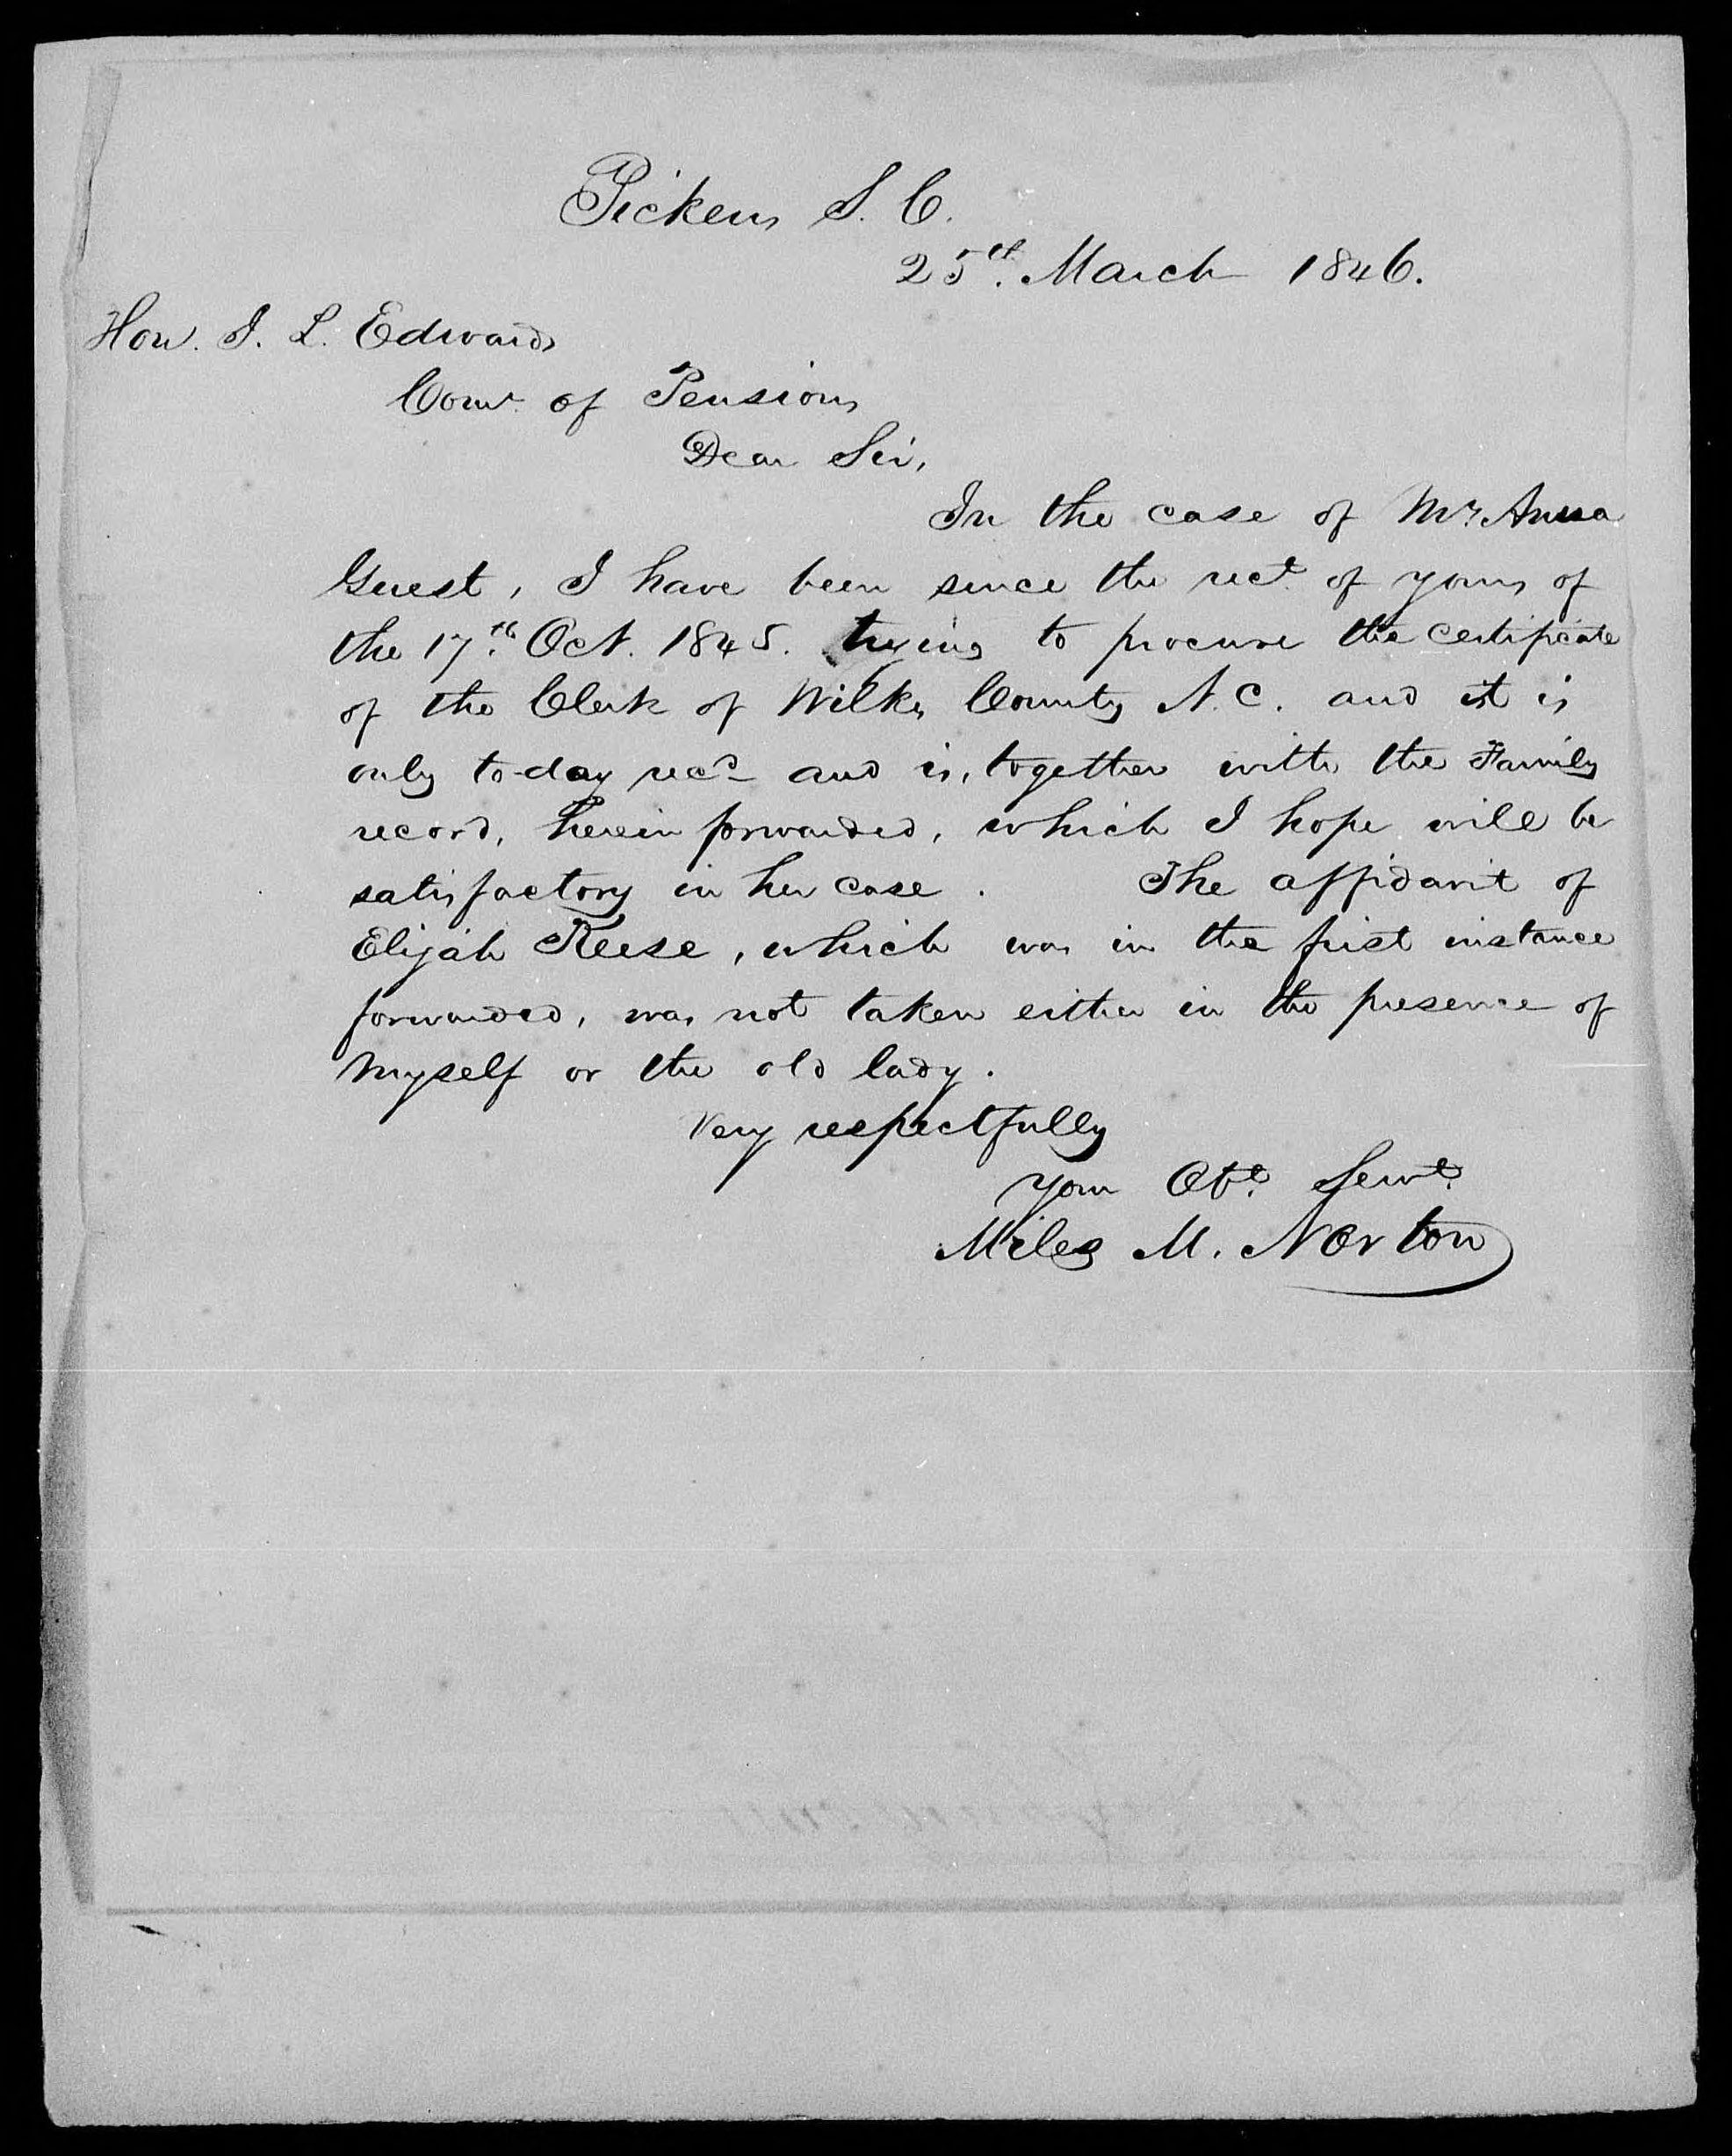 Letter from Miles M. Norton to James L. Edwards, 25 March 1846, page 1